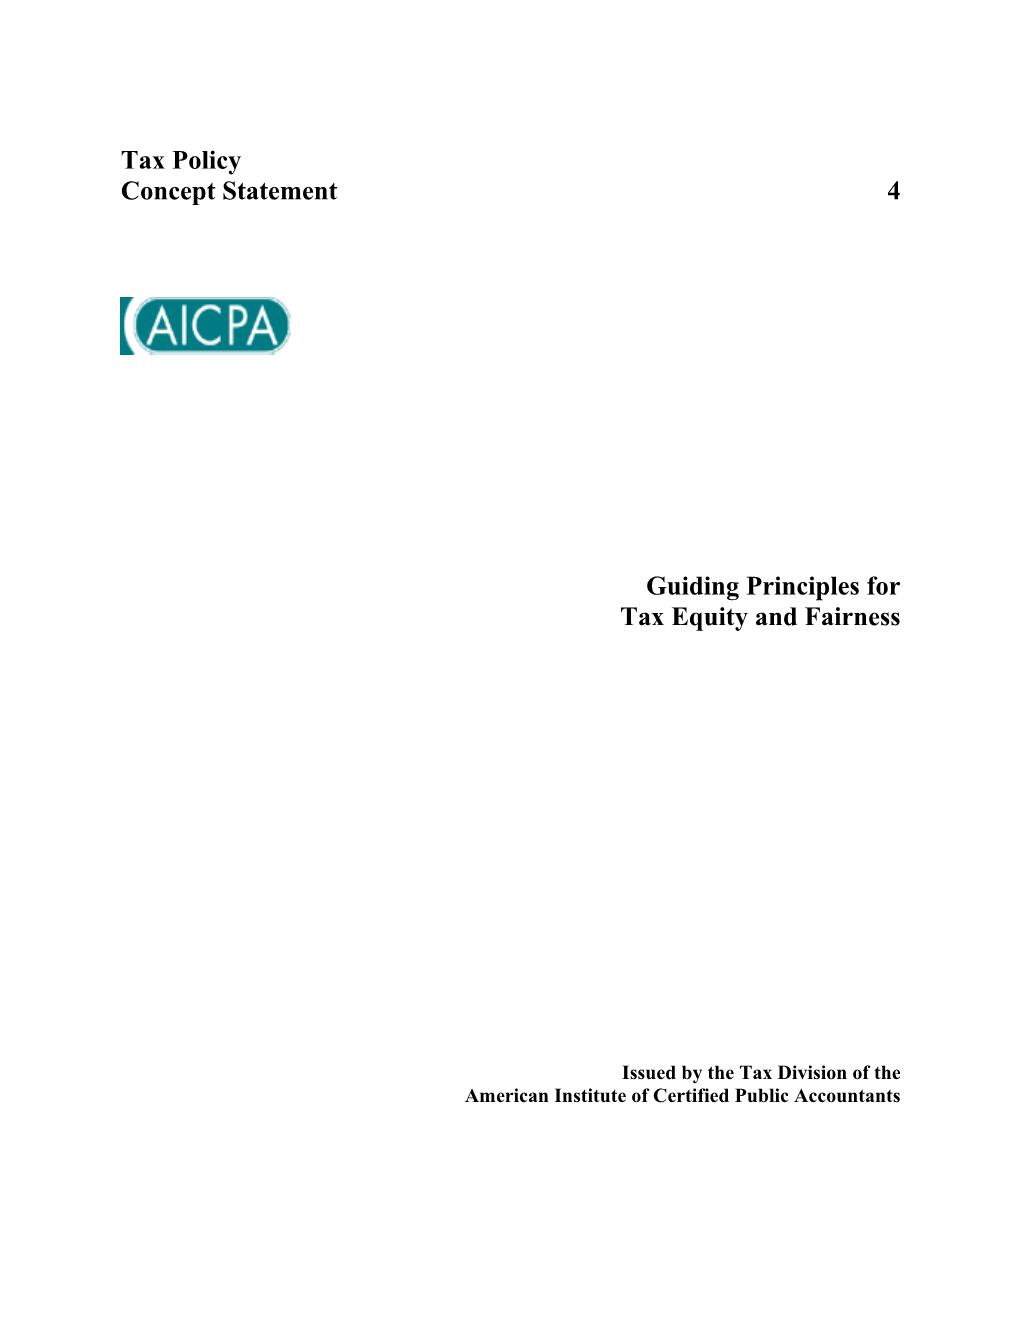 Tax Policy Concept Statement No. 4 — Guiding Principles For Tax Equity And Fairness